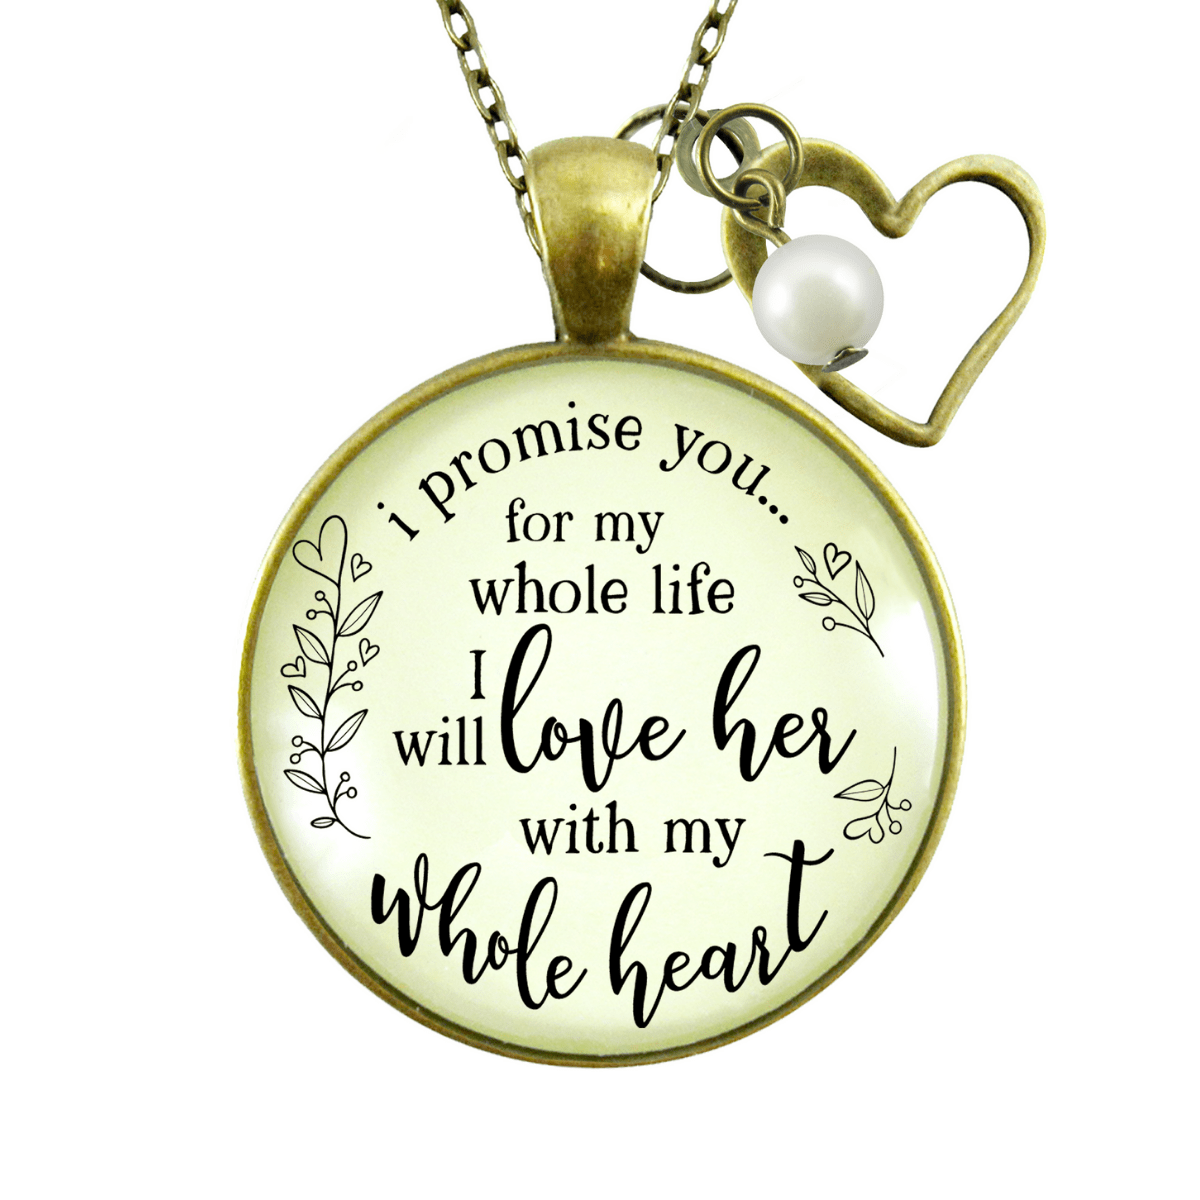 Gutsy Goodness Mother-In-Law Necklace I Promise To Love Her Gift Groom Wedding Jewelry - Gutsy Goodness Handmade Jewelry;Mother-In-Law Necklace I Promise To Love Her Gift Groom Wedding Jewelry - Gutsy Goodness Handmade Jewelry Gifts